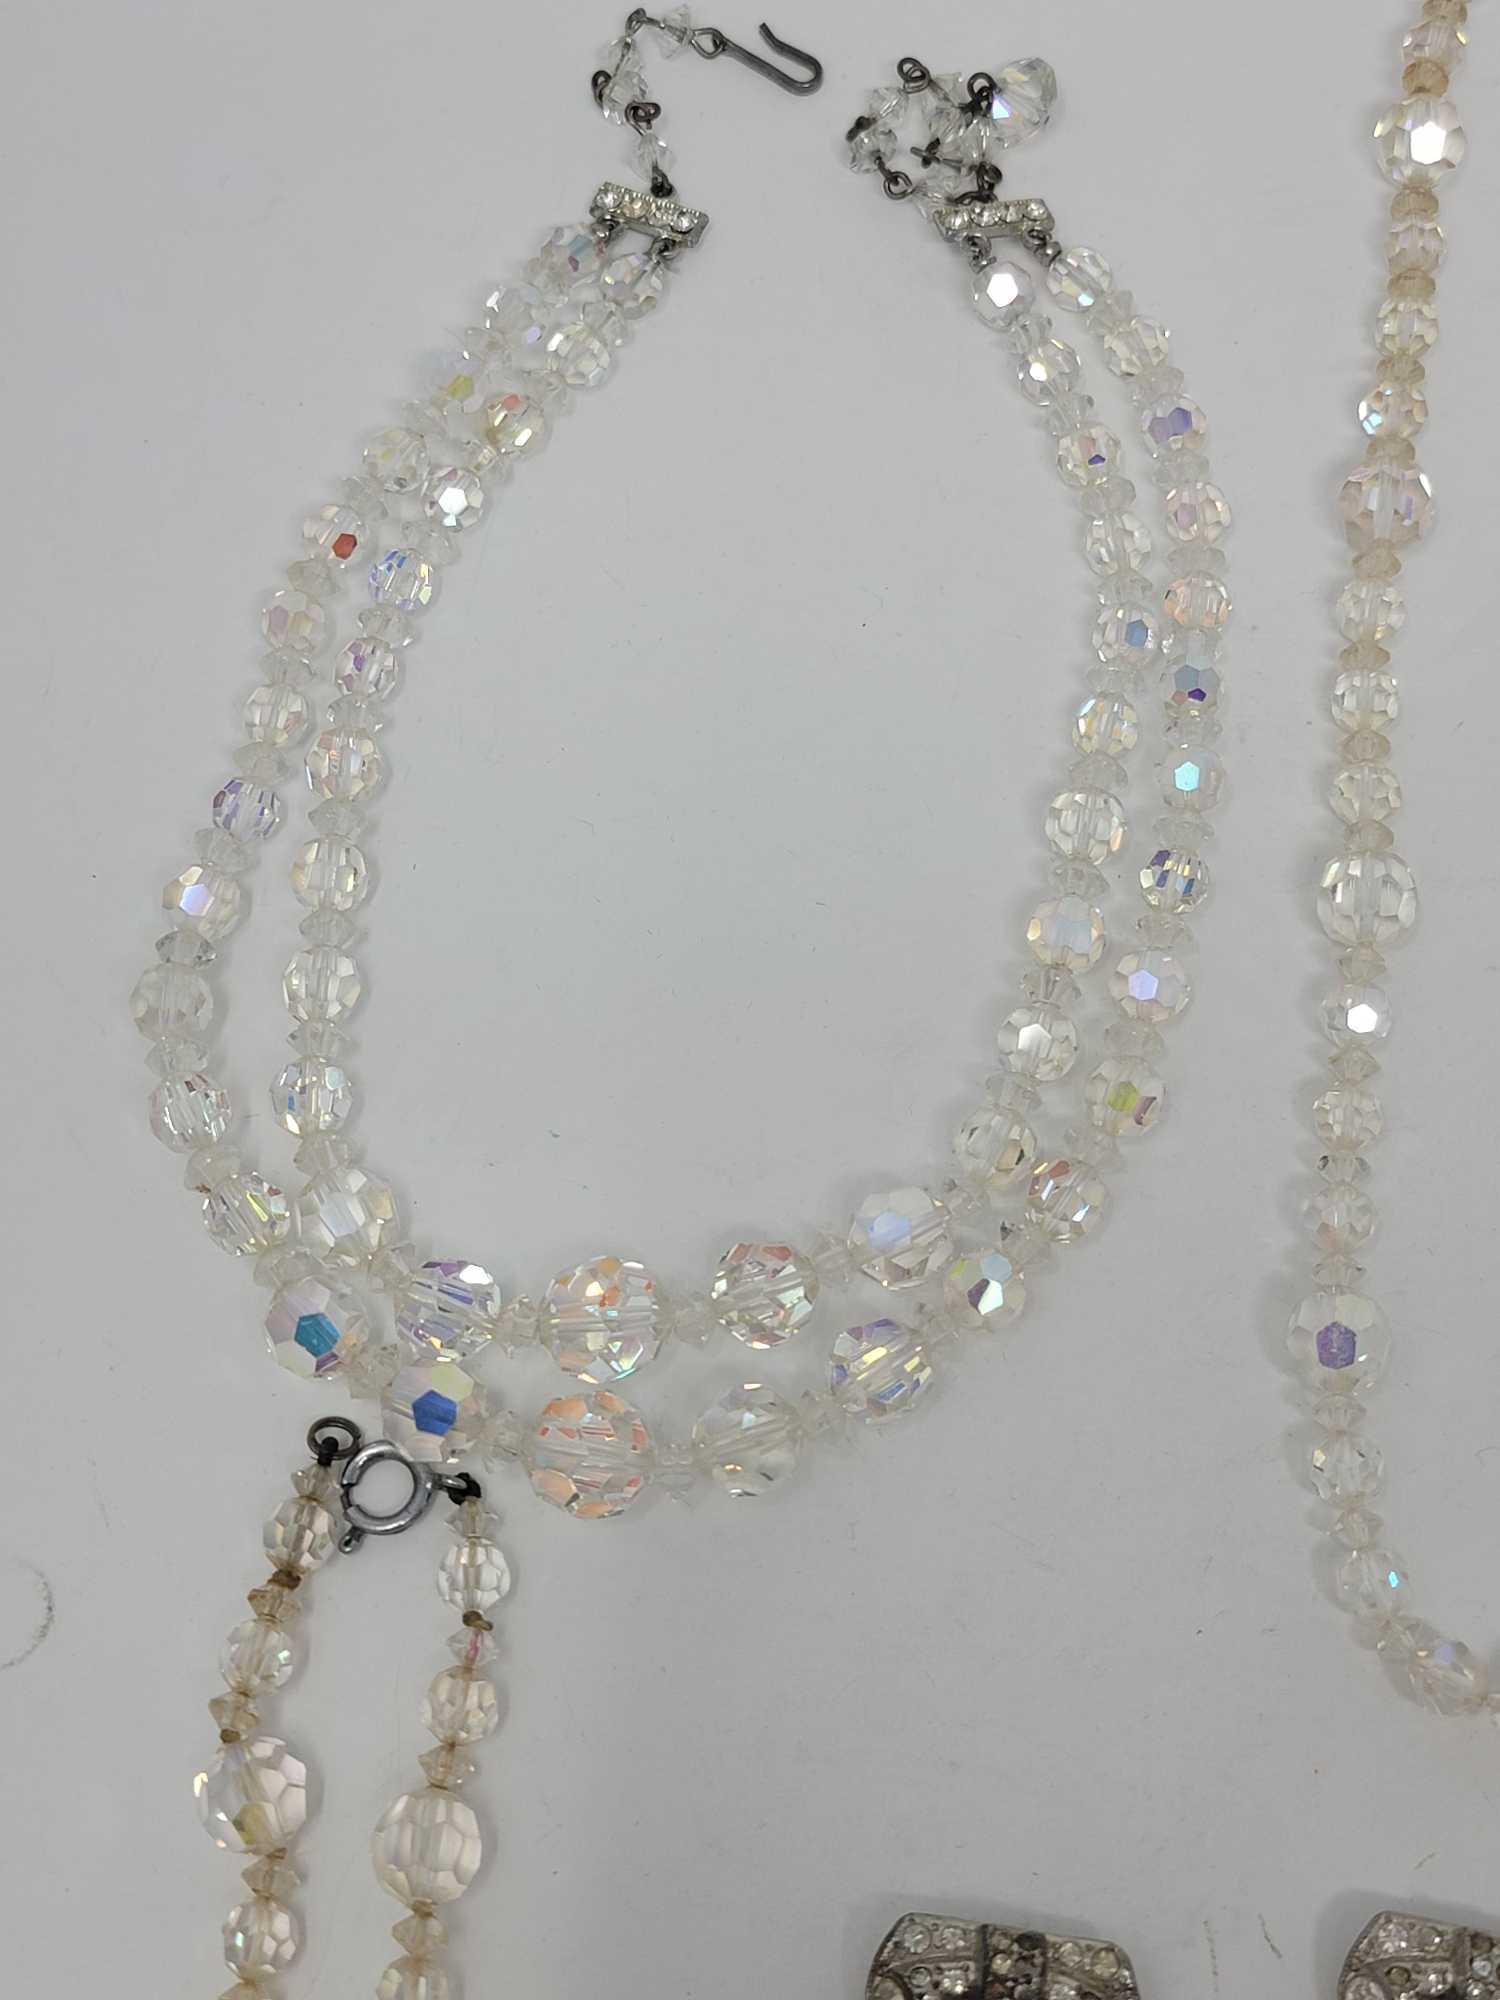 Grouping of Rhinestone and Crystal Jewelry